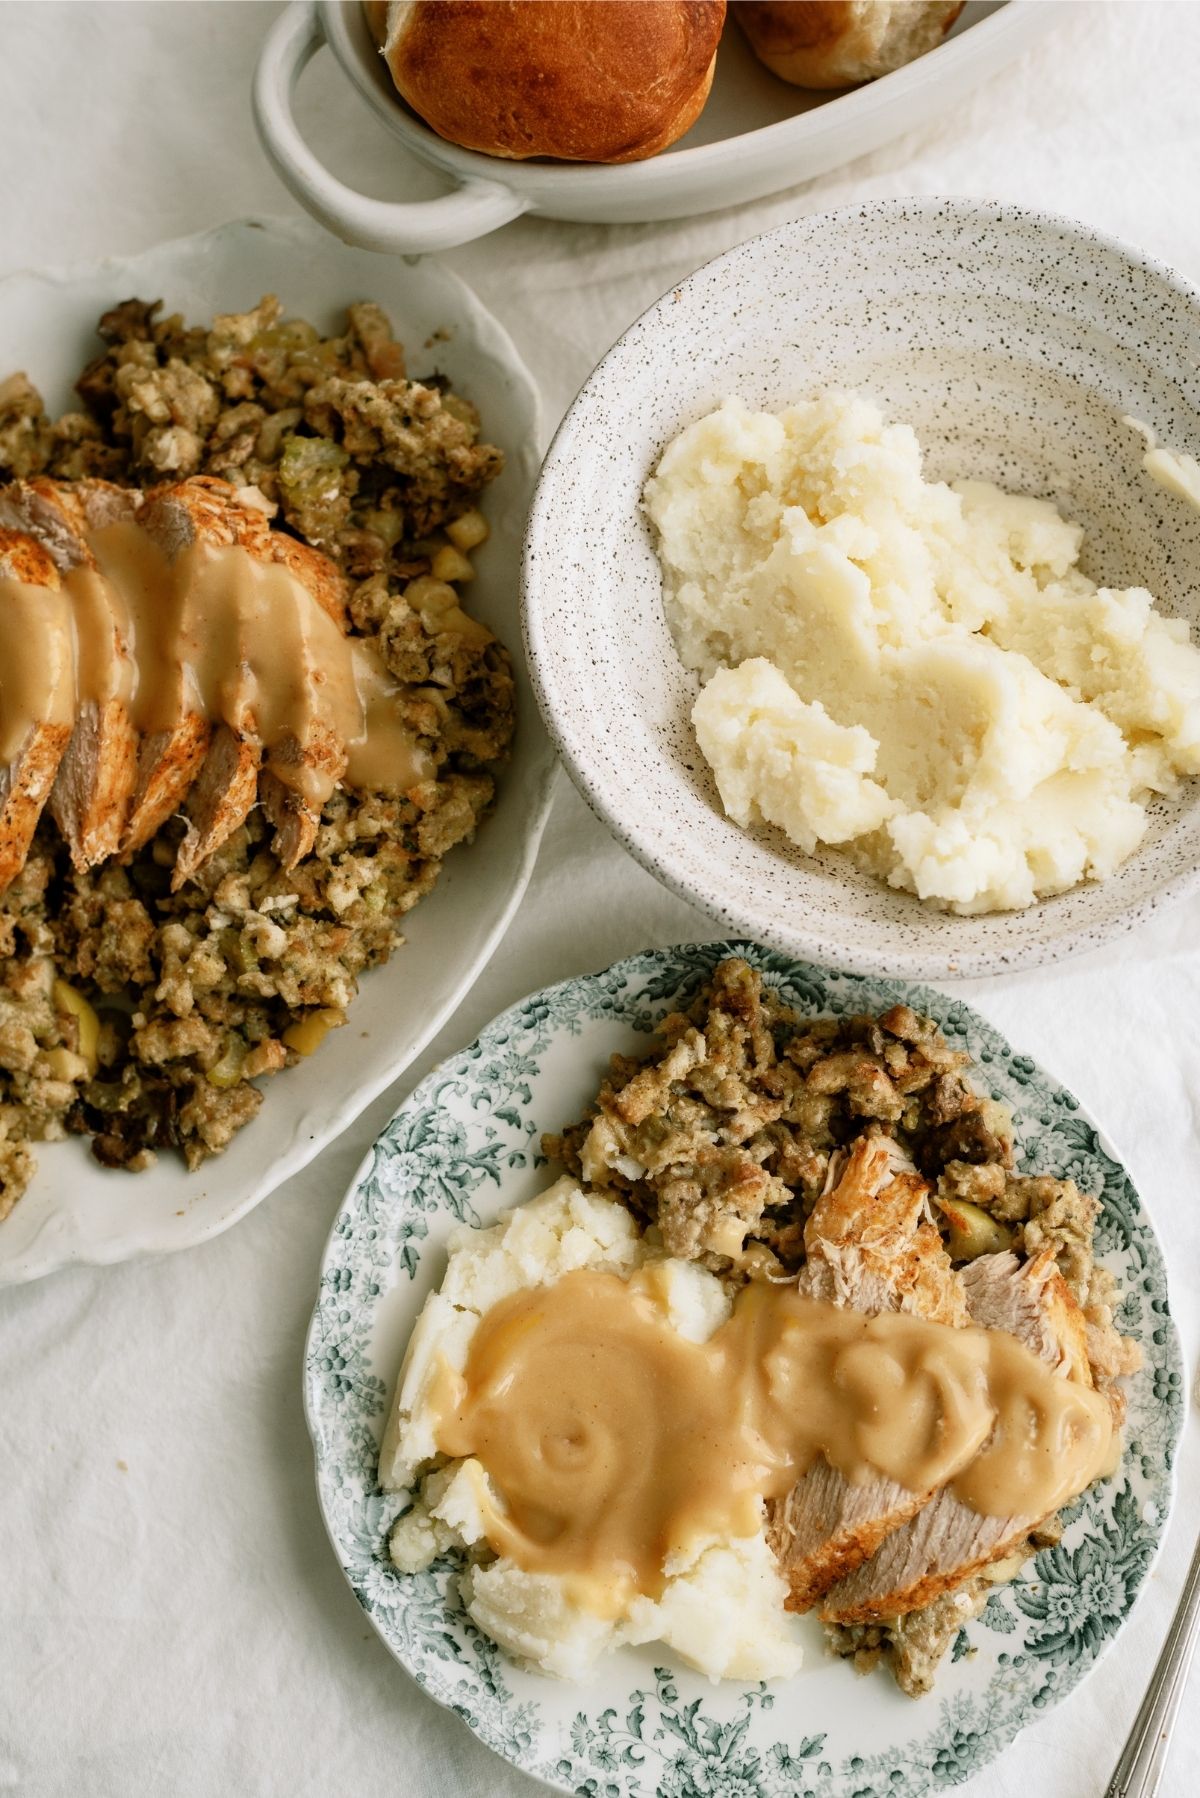 Slow Cooker Turkey and Stuffing with mashed potatoes and gravy on a plate